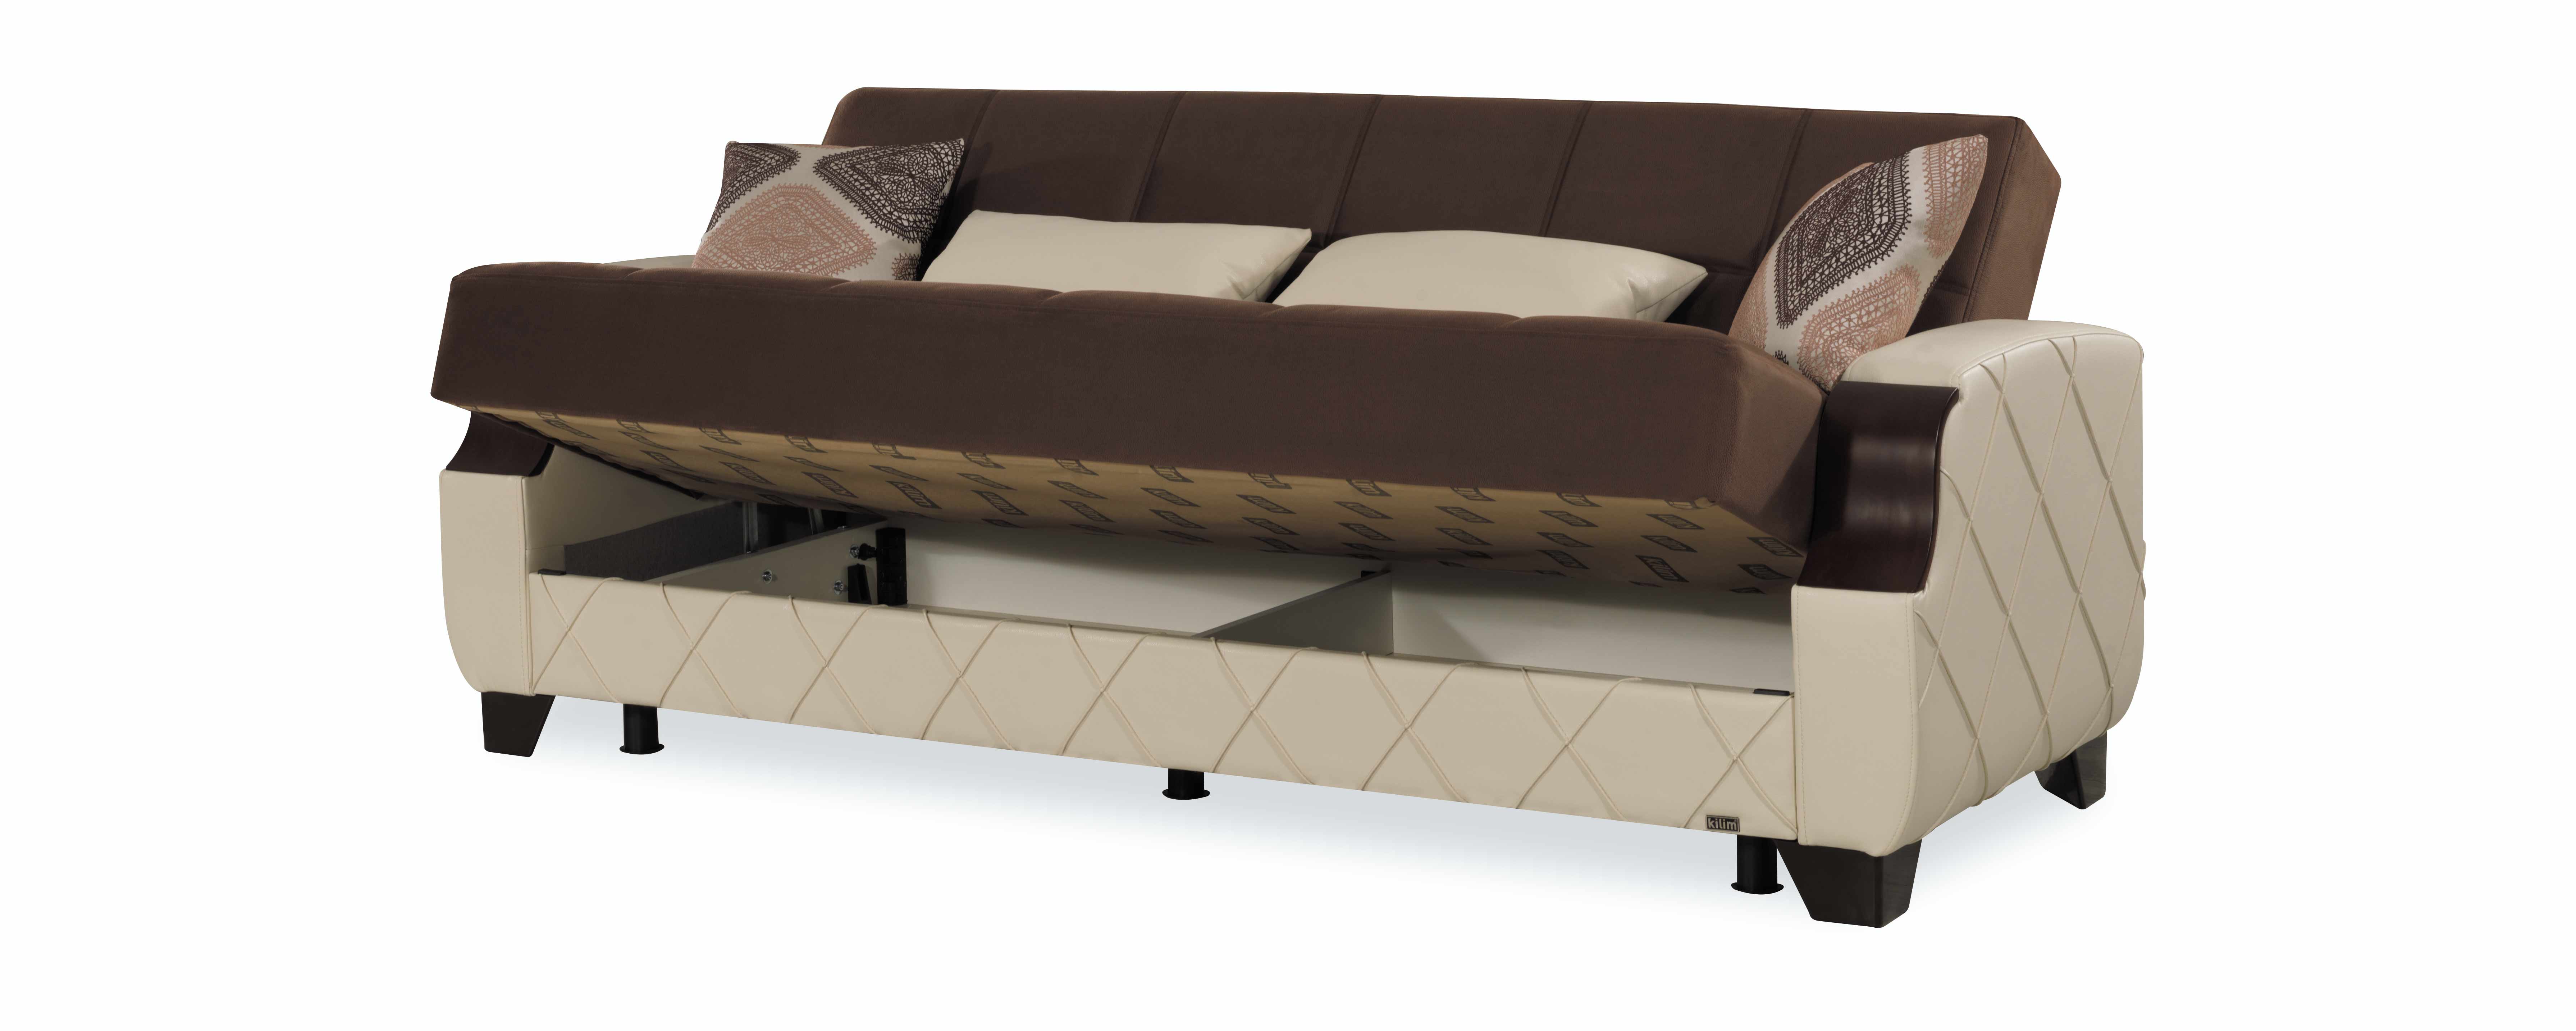 brown and cream sofa bed